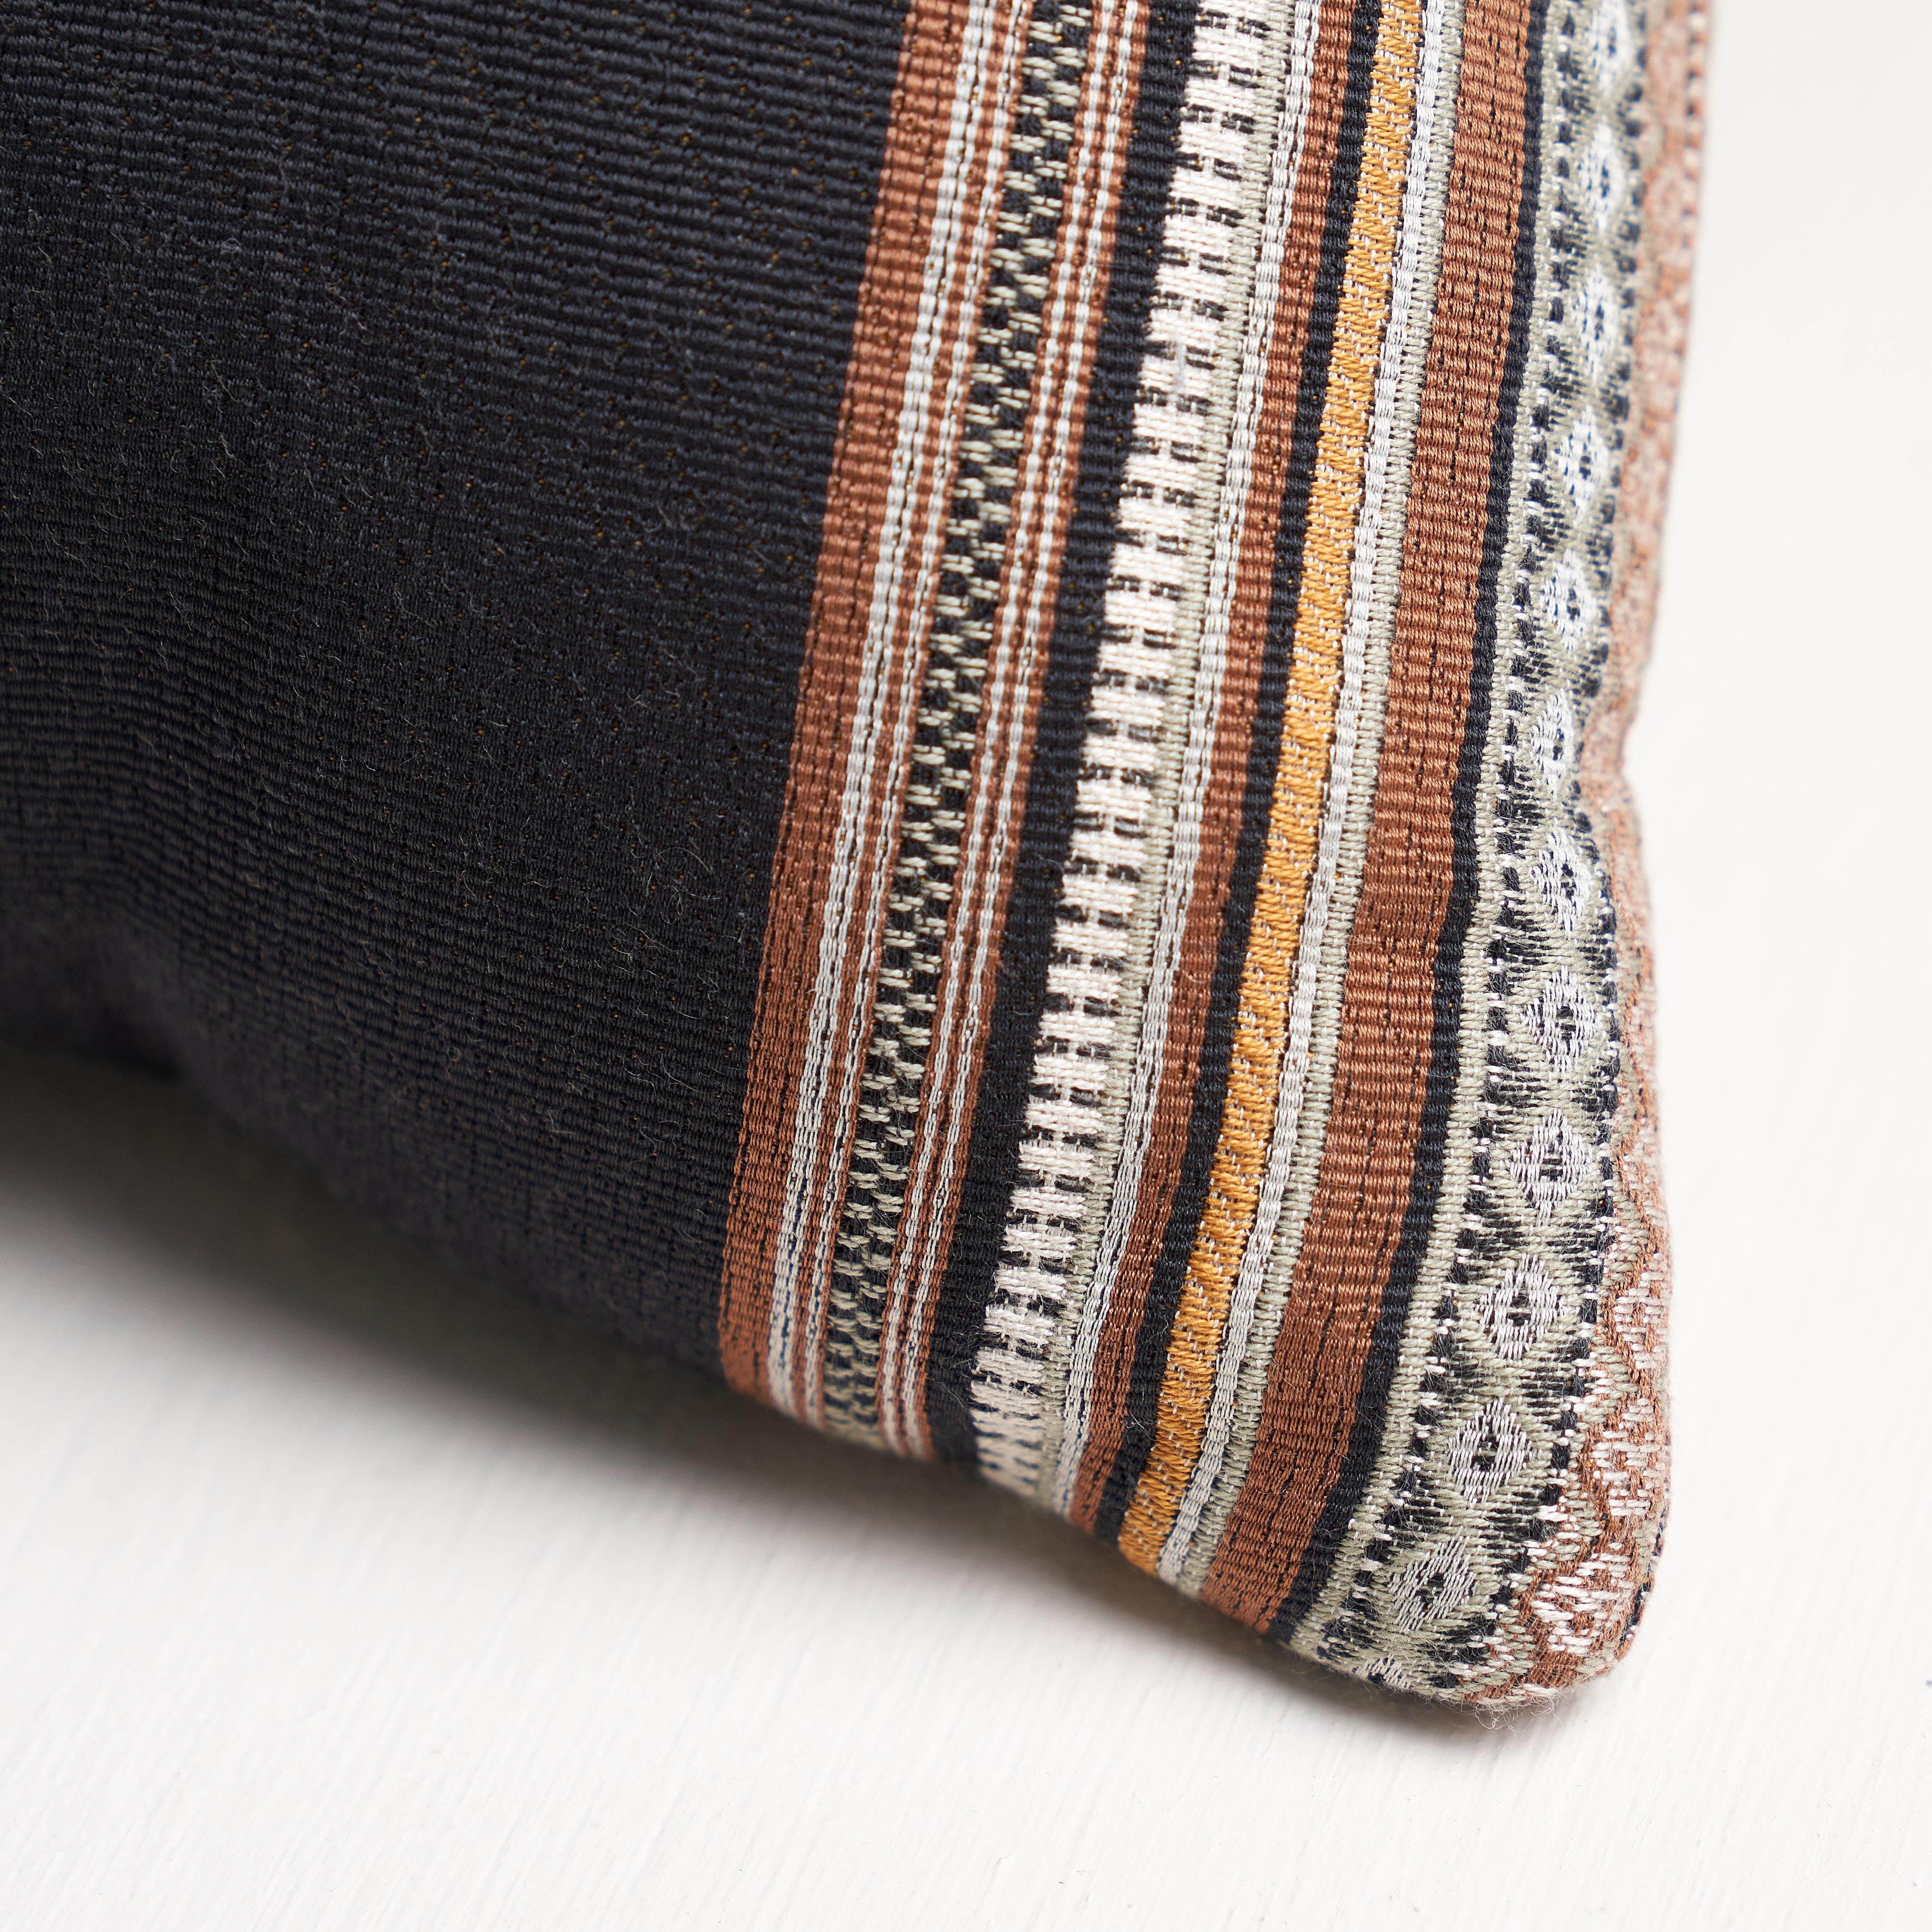 This pillow features Markova Stripe with a knife edge finish. This elaborately detailed, multi-color showstopper is the perfect upholstery weight stripe. It‚Äôs a wonderfully pattern in an easy-to-use scale that will add a note of drama to any room.